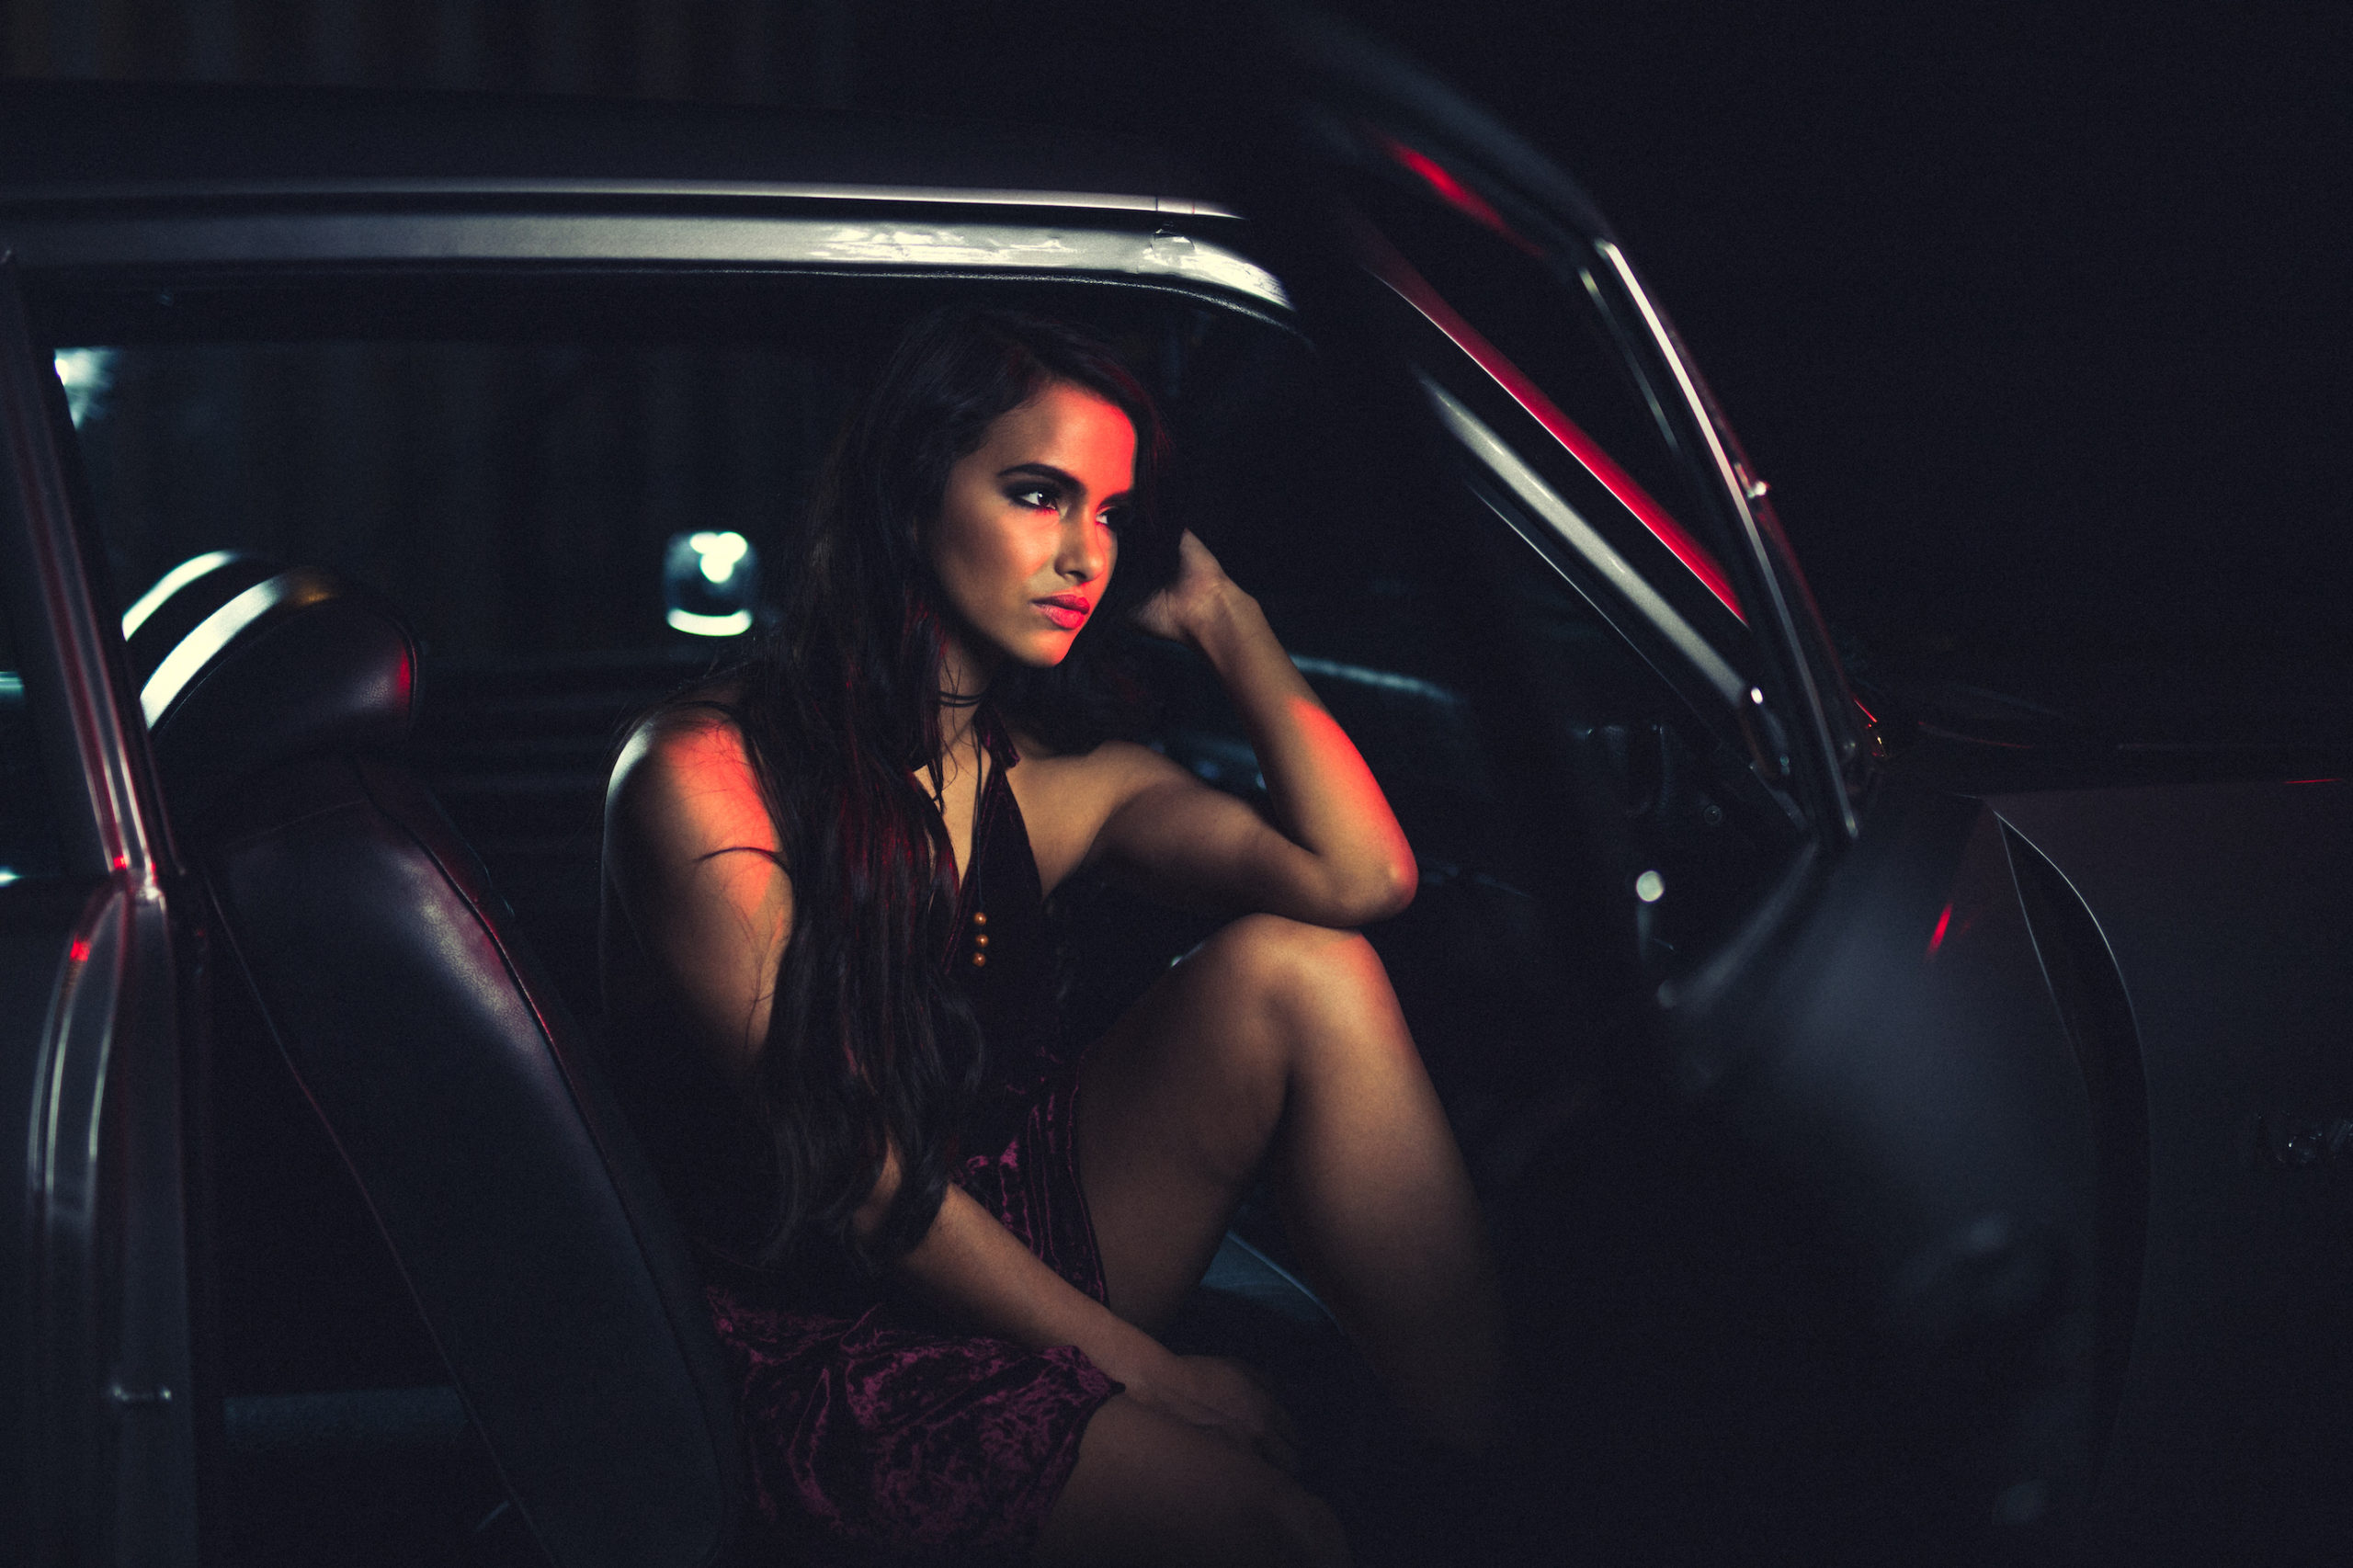 IU Creative Talent Agency Fort Lauderdale Model Profile Mercedes Side profile of woman with long hair wearing lingerie looking off into the distance posing for camera from the front seat of an old car